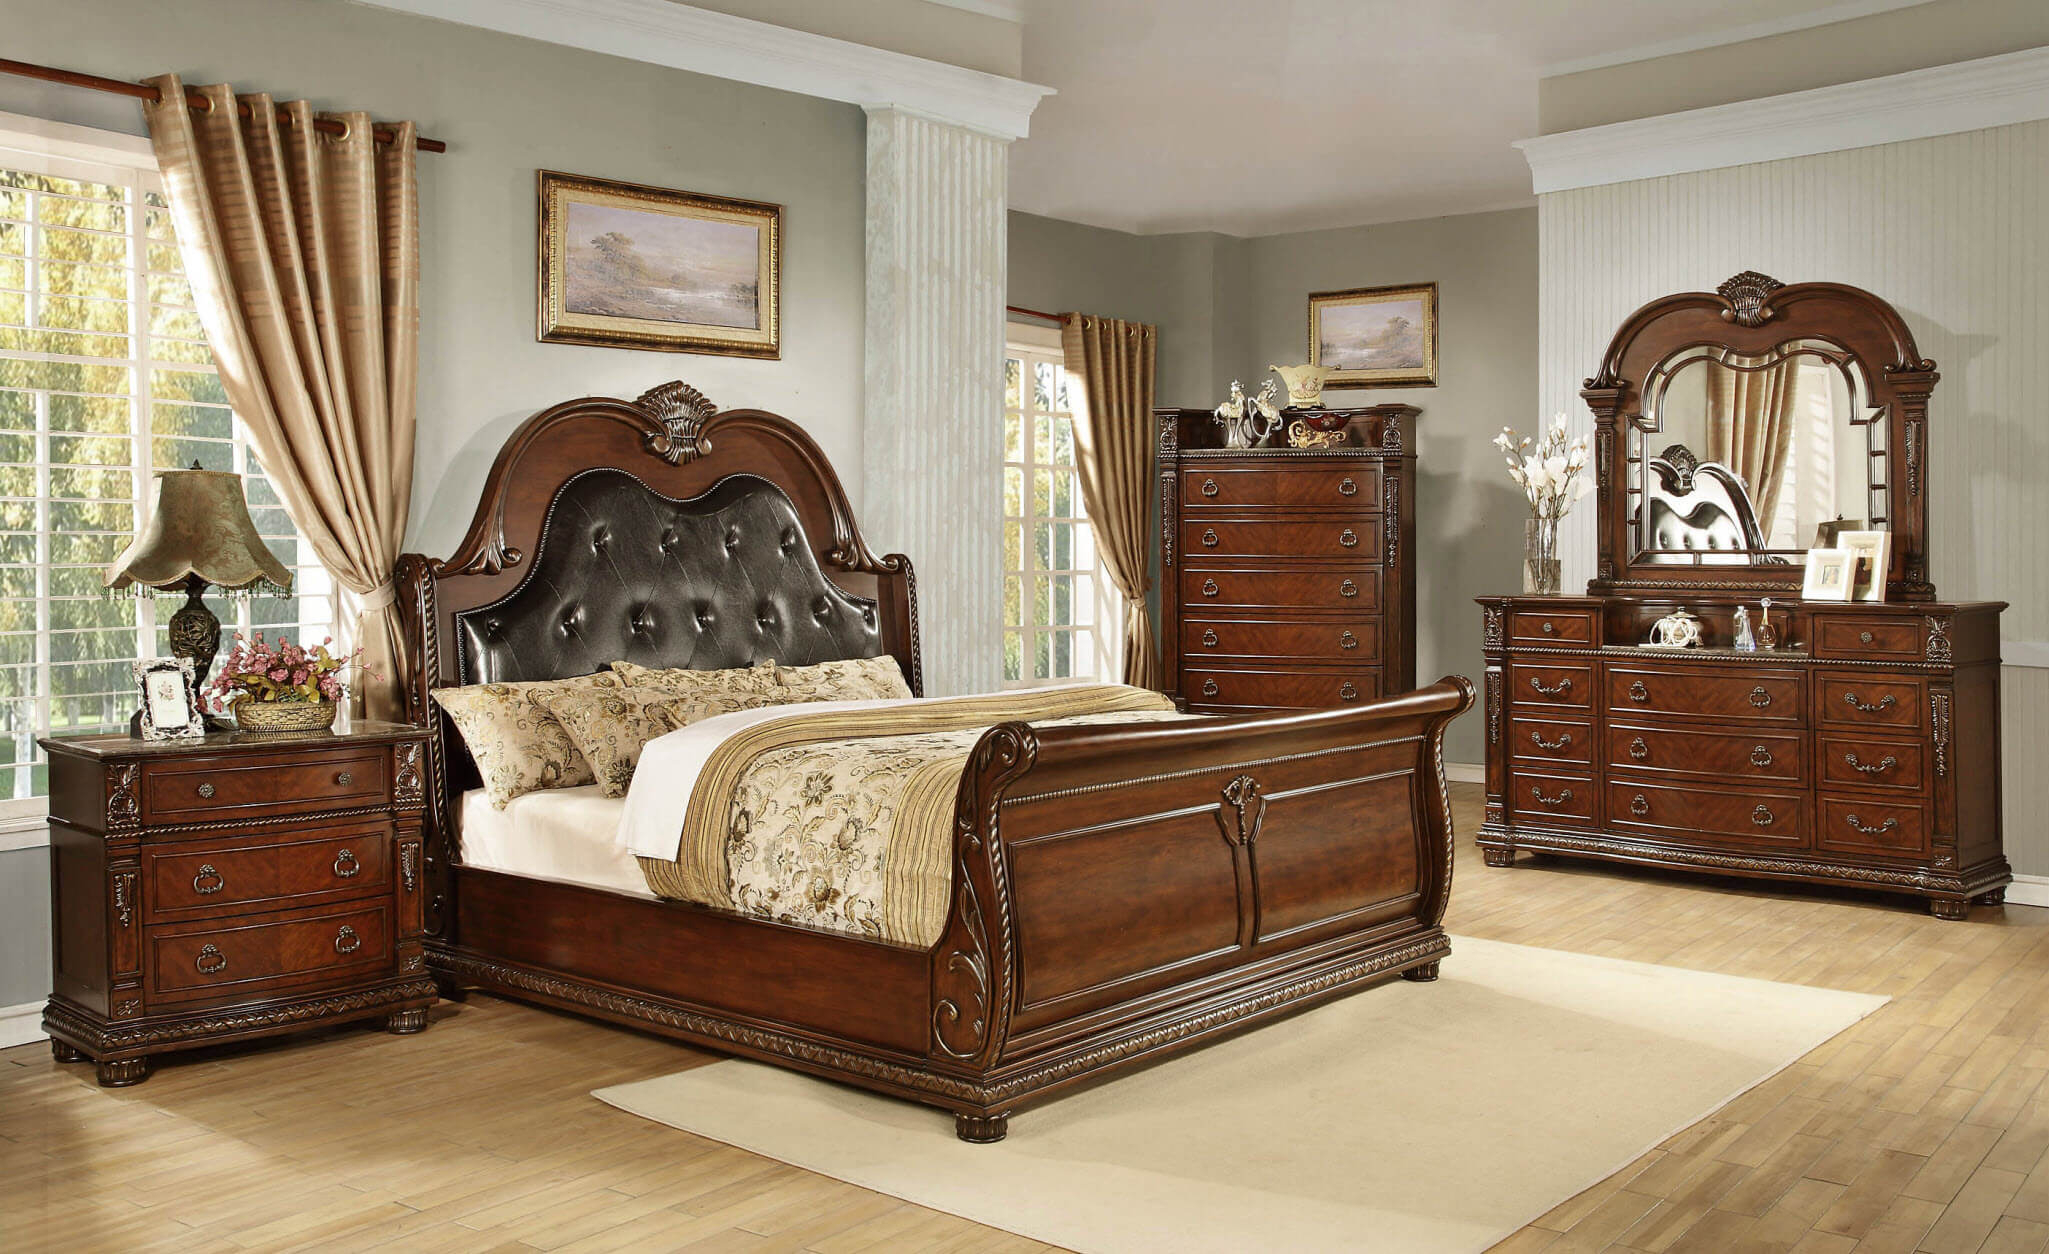 B718 Palace Marble Top Bedroom Set Global Trading with regard to sizing 2049 X 1254